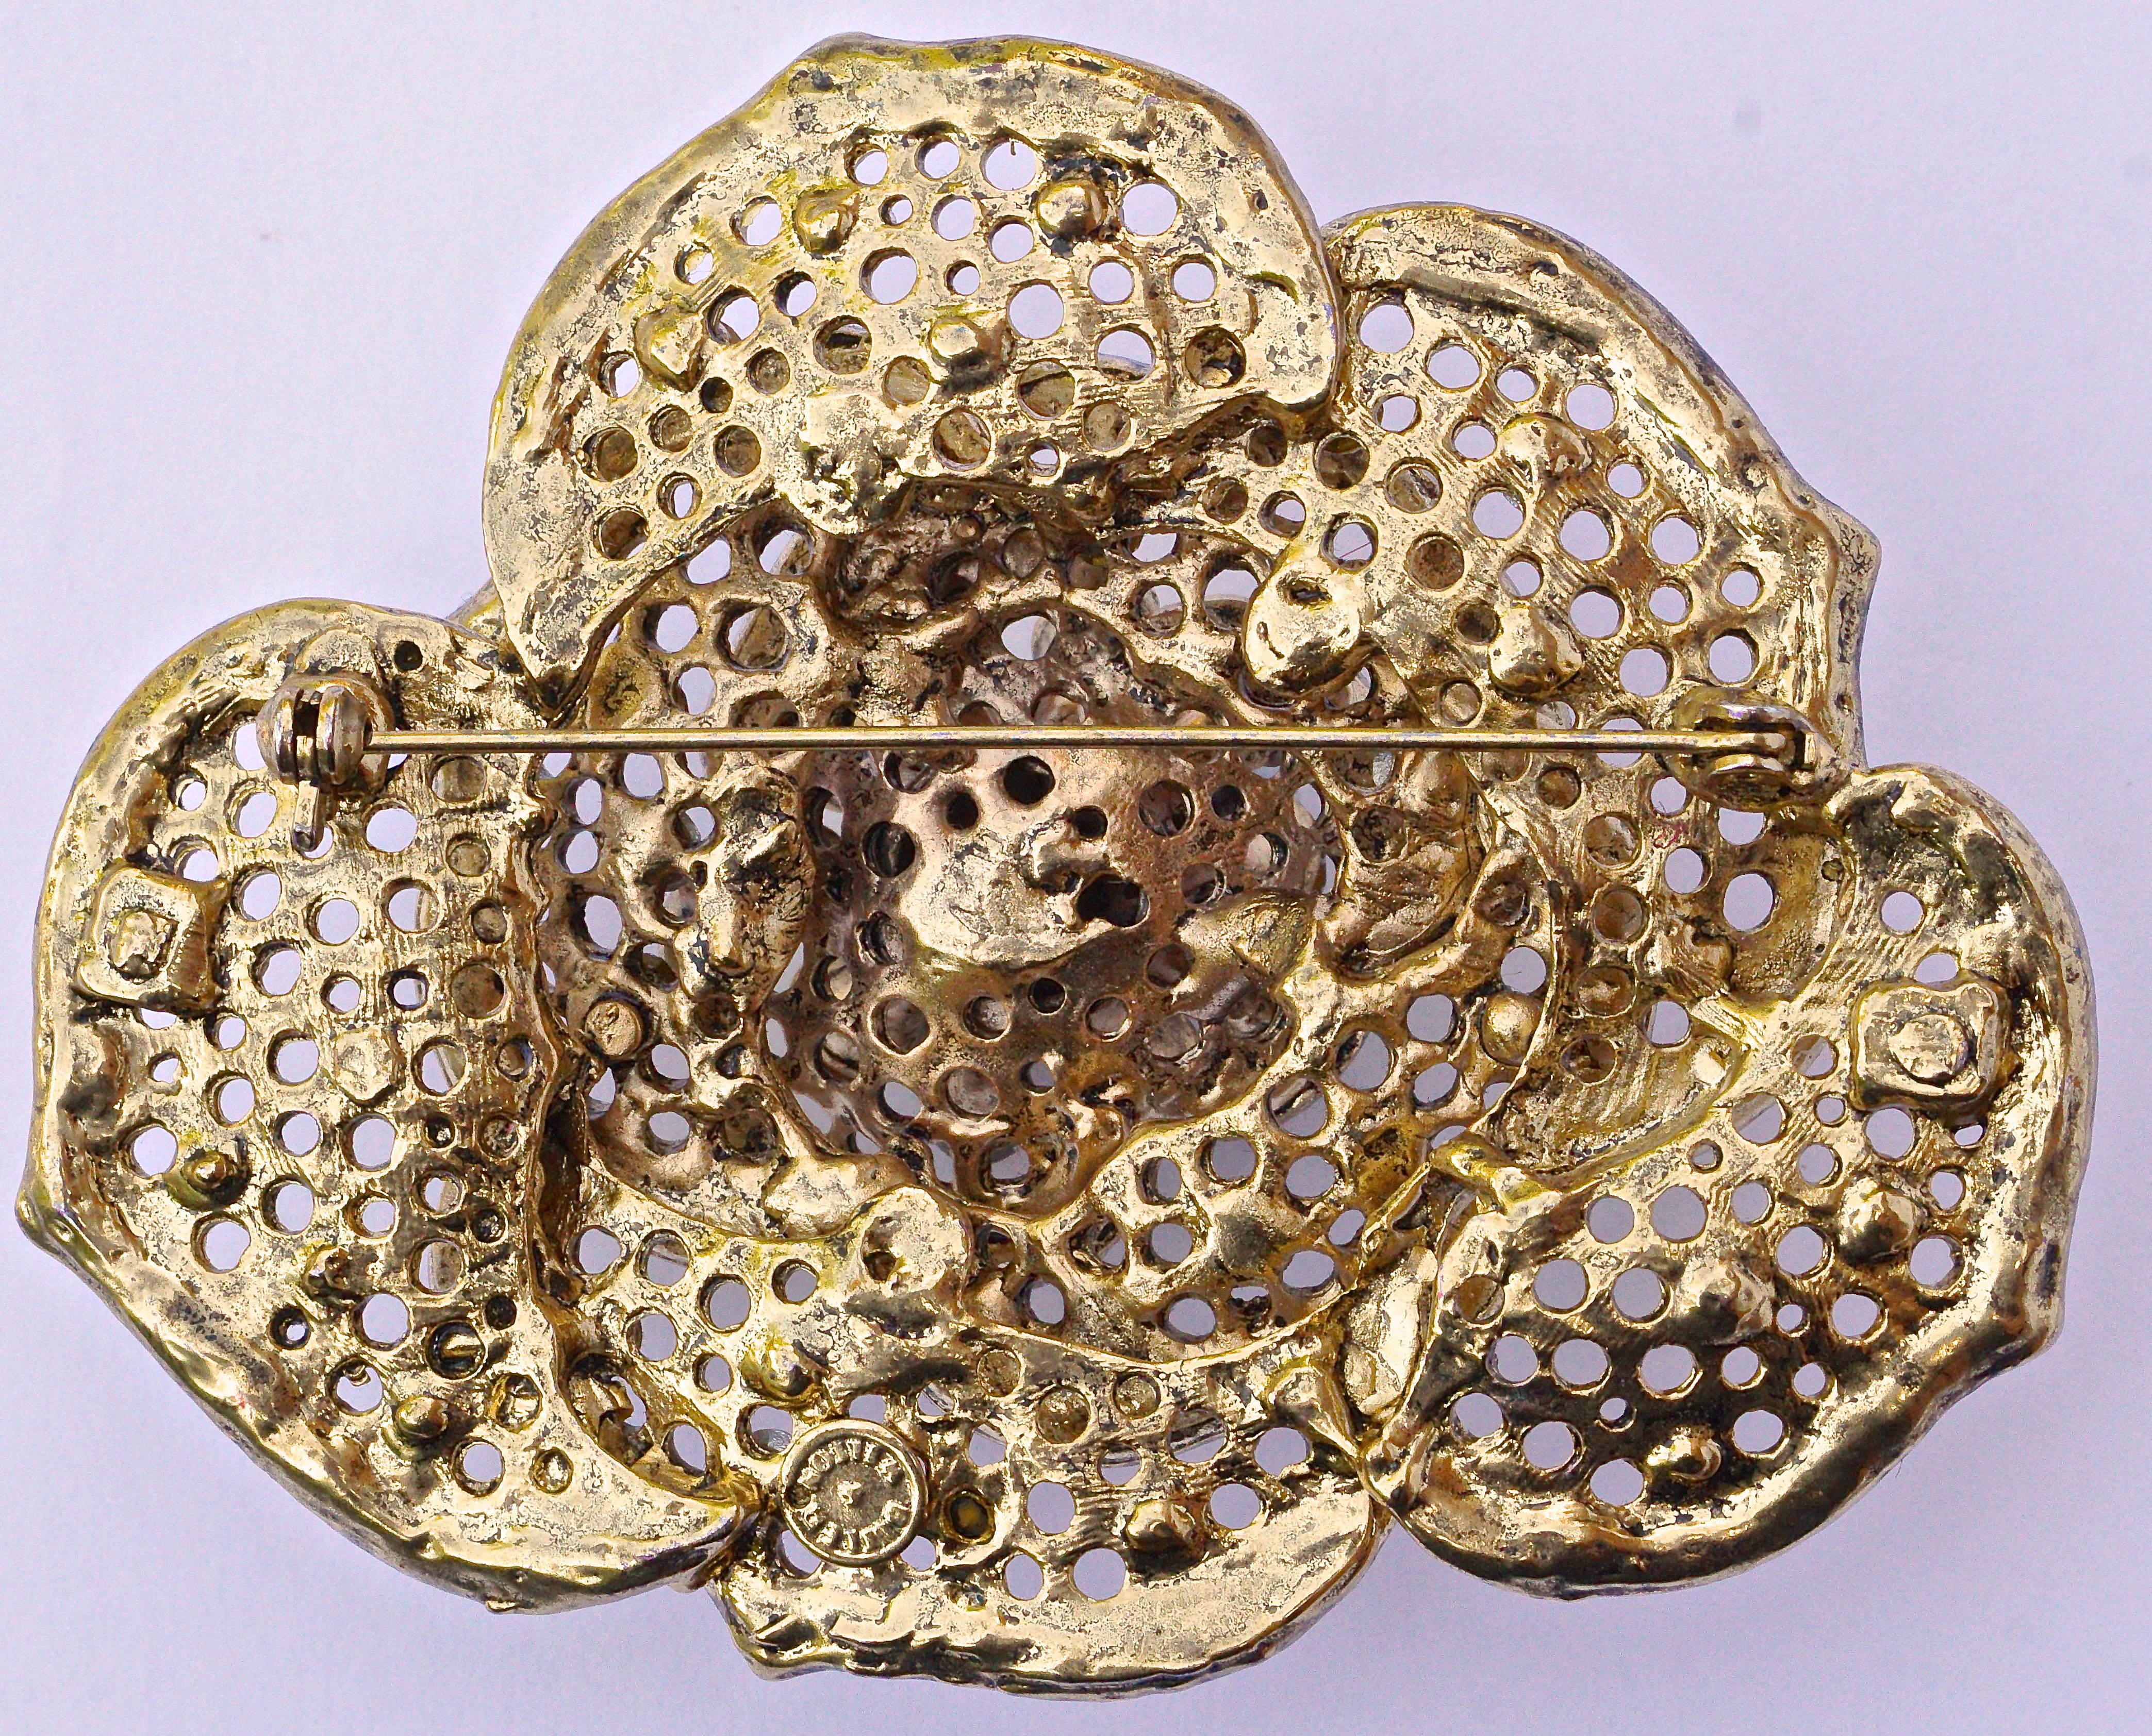 Butler & Wilson large gold plated flower brooch embellished with clear and aurora borealis crystals. The brooch is maximum 7.5cm (2.94 inches) wide, and 6cm (2.38 inches) tall.
 
This is a fabulous statement brooch with sparkling crystals, by London